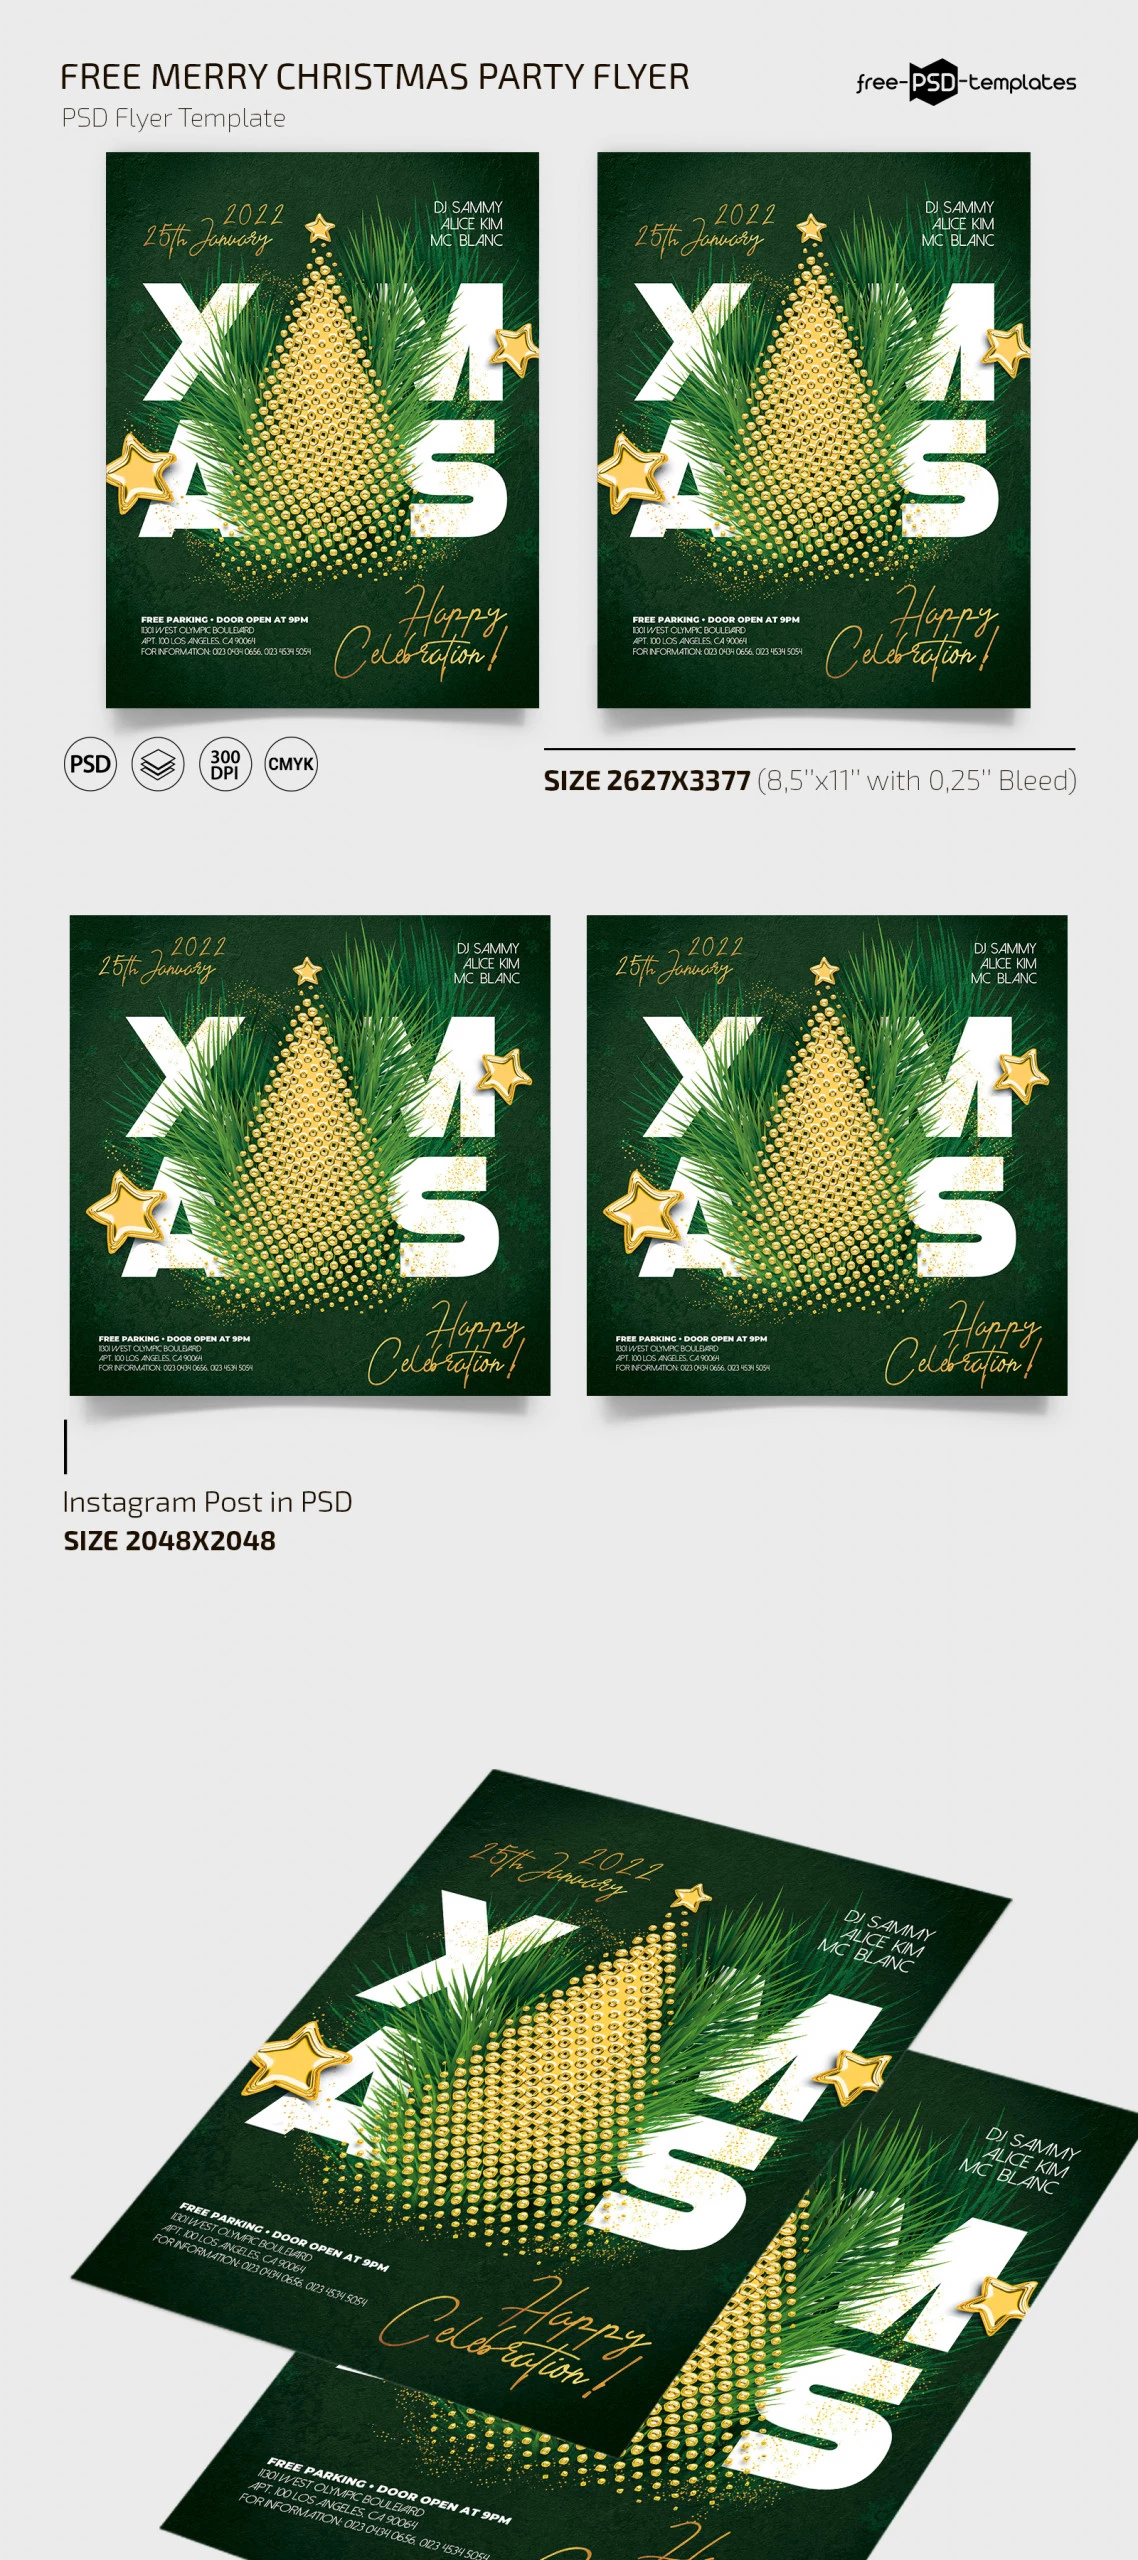 Free Merry Christmas Flyer Template + Instagram Post (PSD)